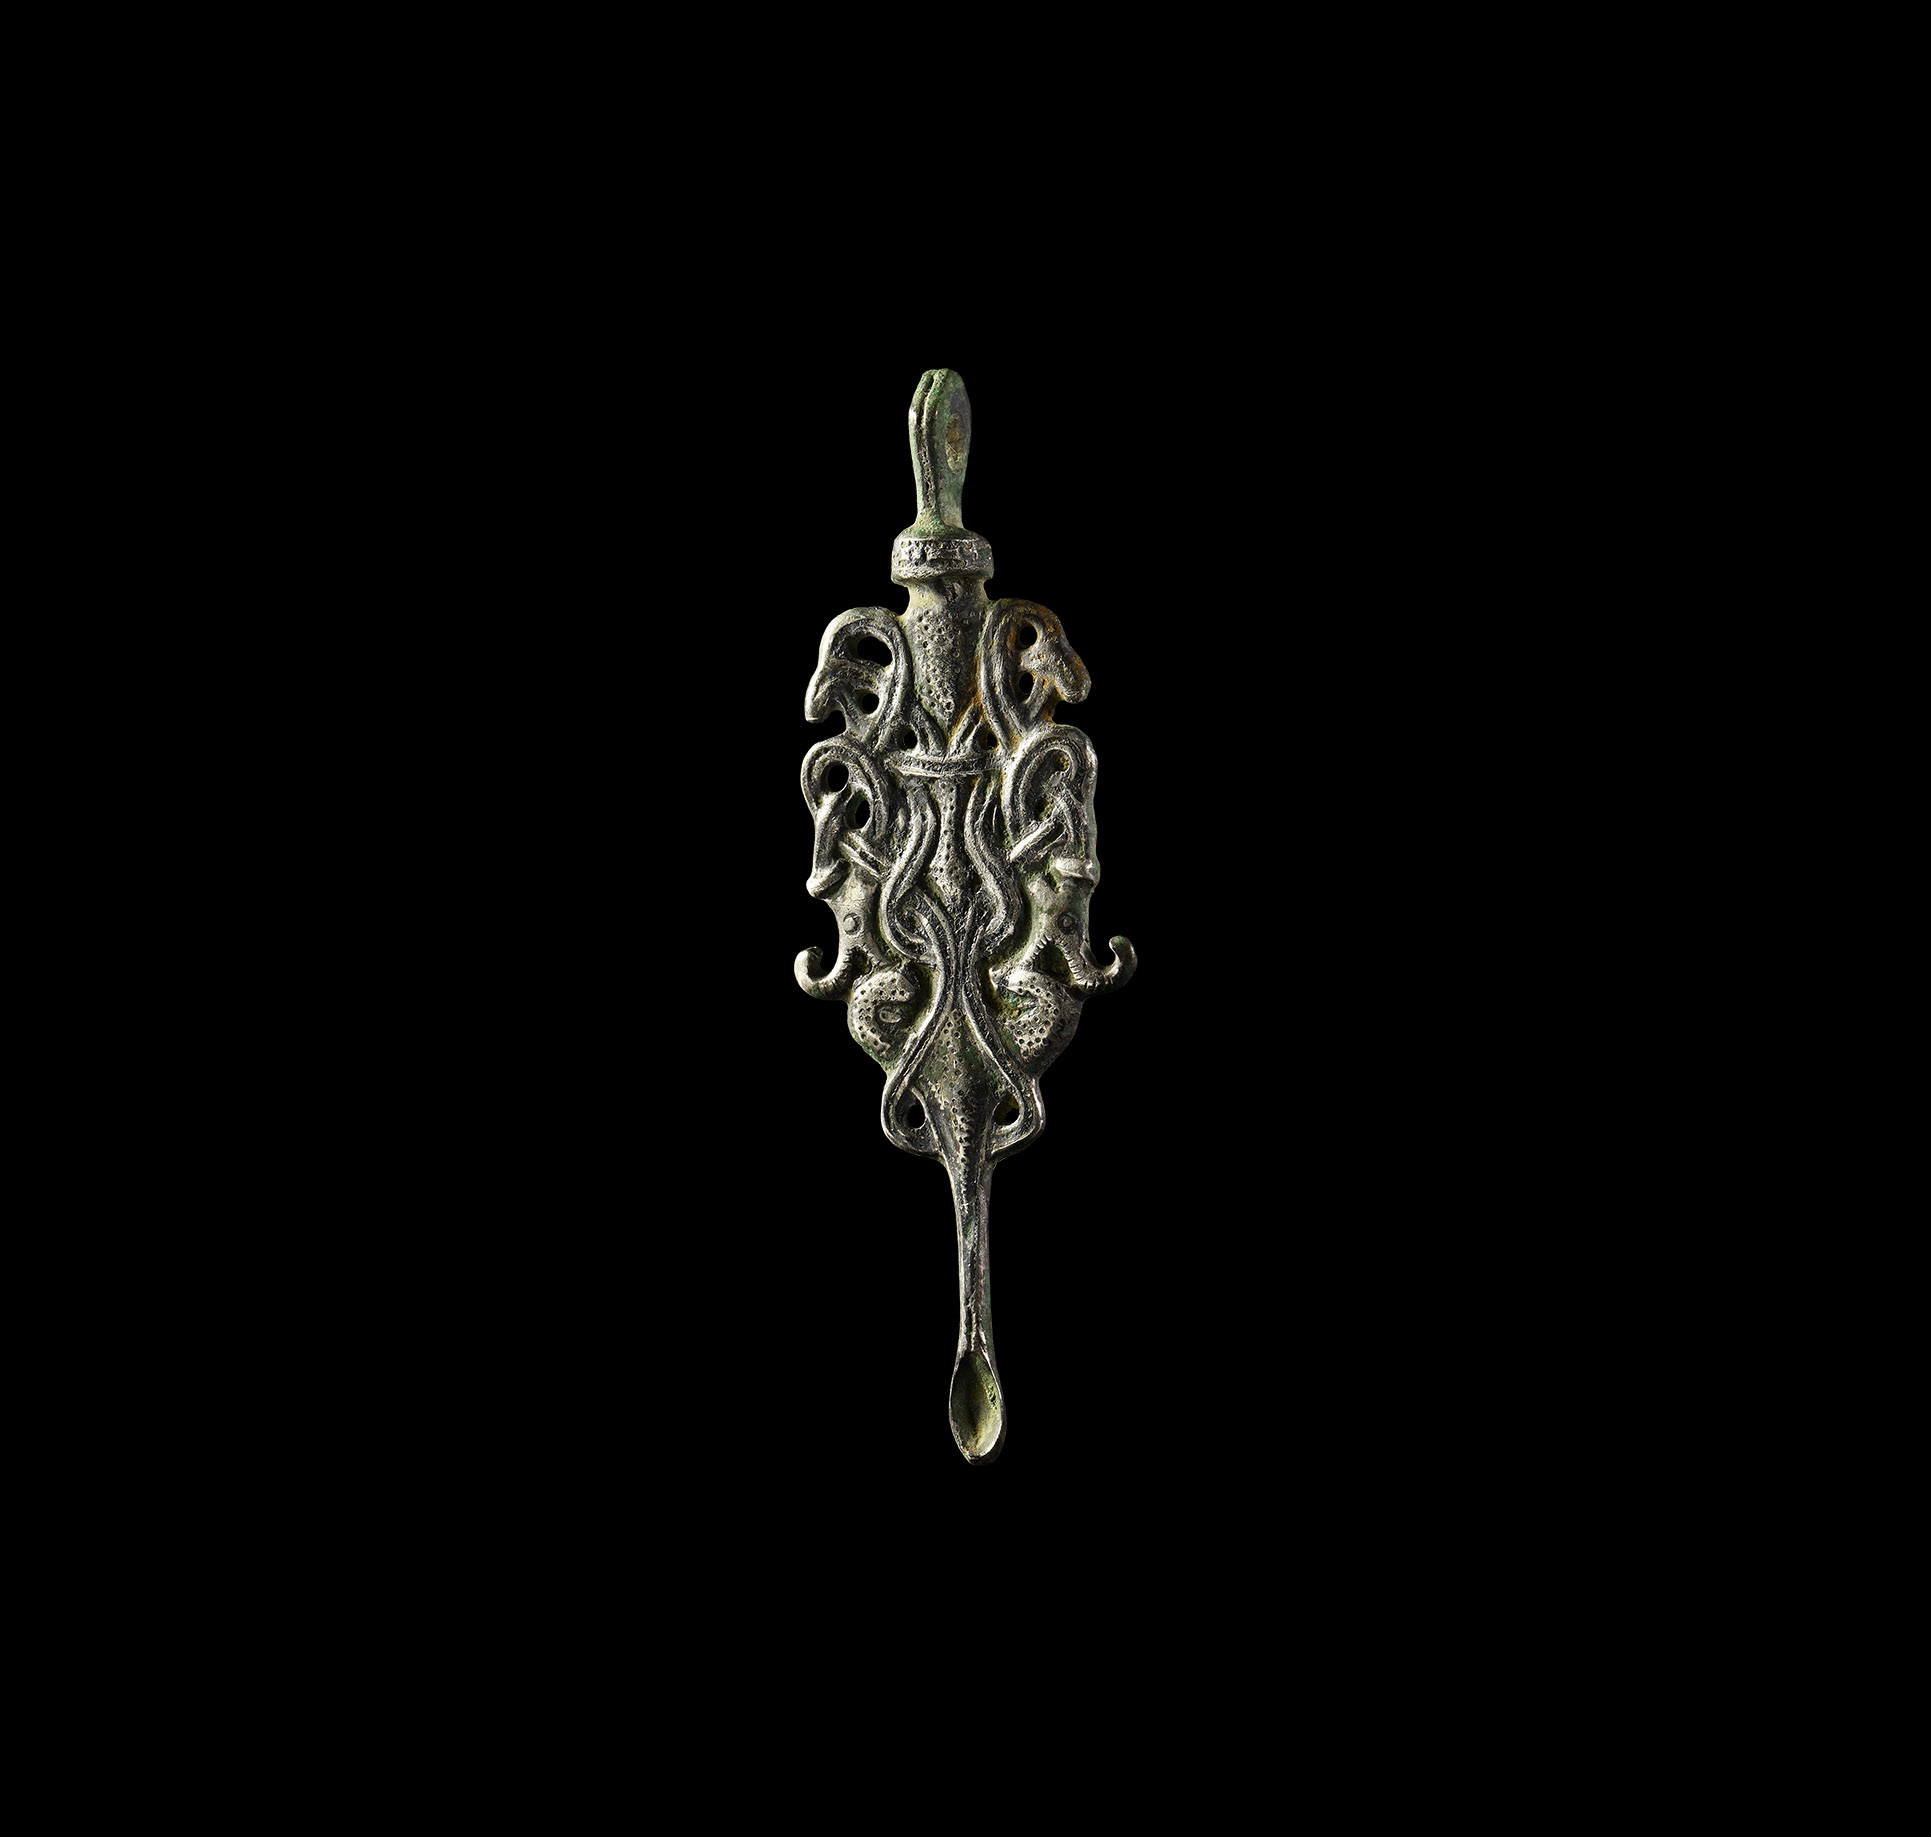 Viking Silver Apothecary Spoon with Entwined Beasts